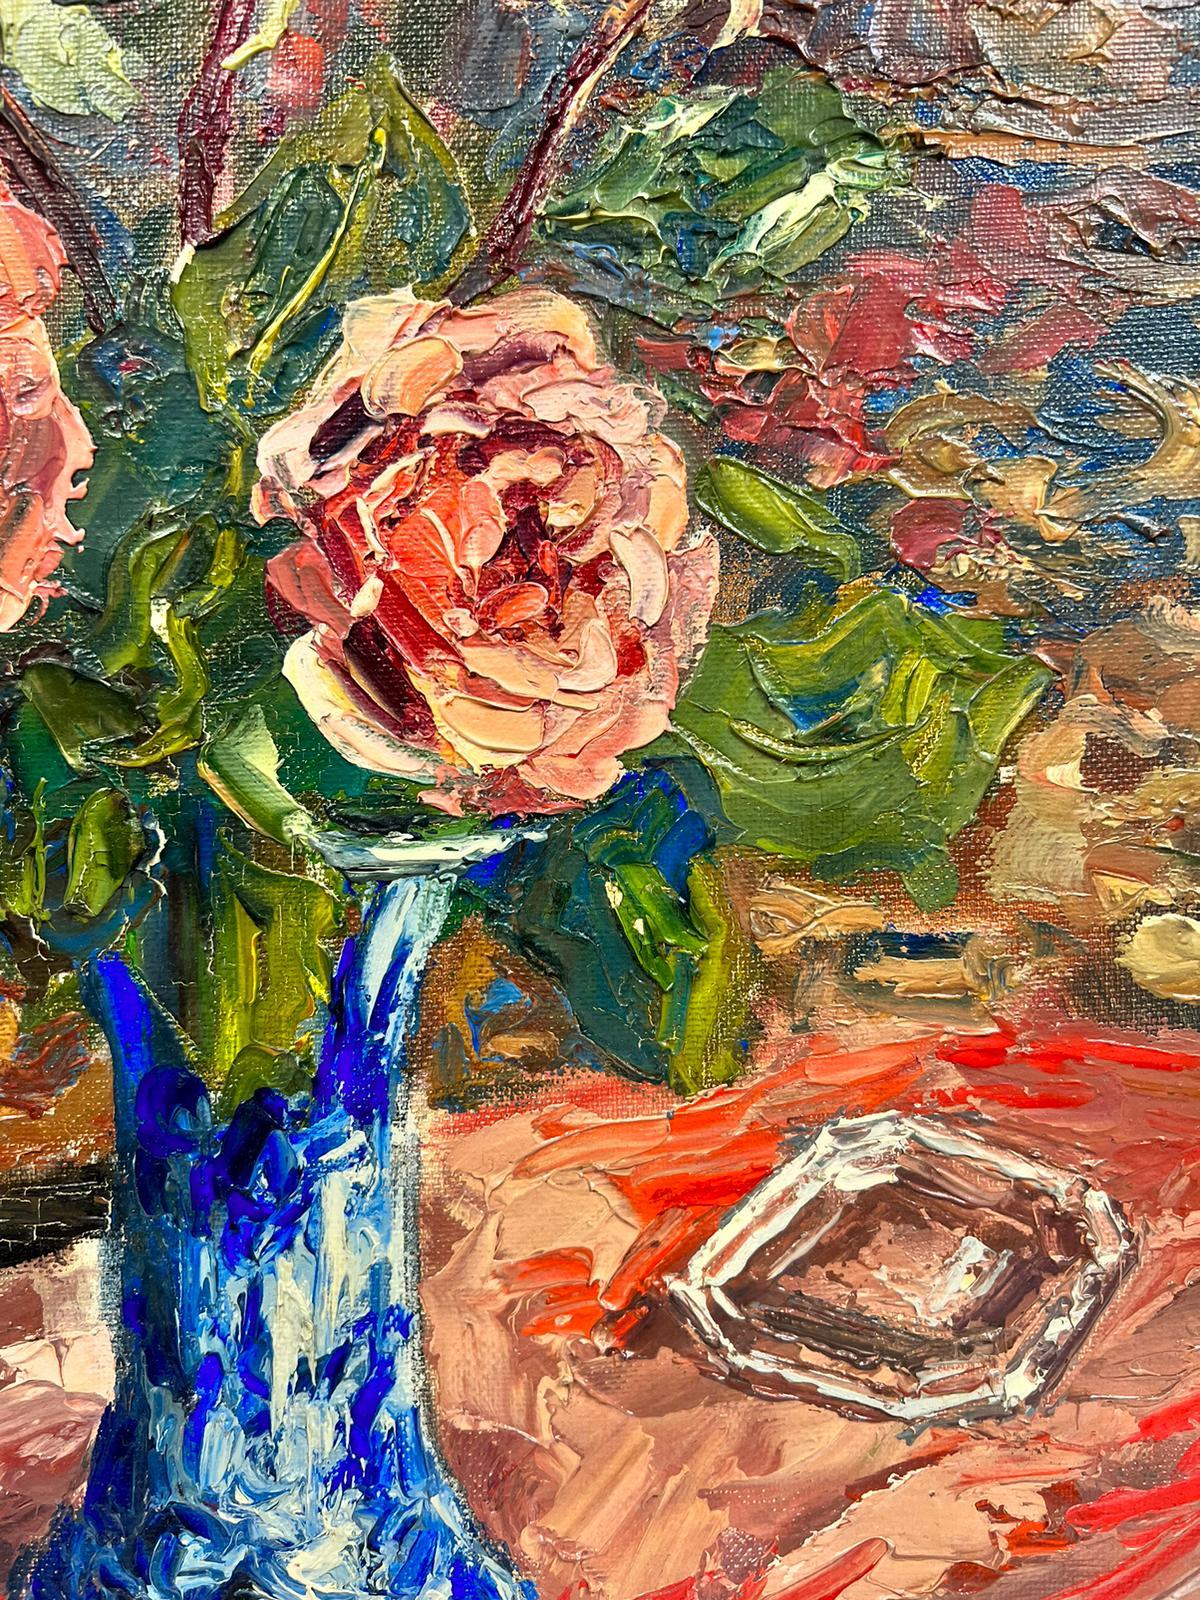 Roses In Vase
by Josine Vignon (French 1922-2022)
signed on front
oil painting on canvas, unframed

canvas: 18 x 13 inches

Colors: Blue colors, grey, beige, brown and white

Very good condition

Provenance: from the artists estate, France

Josine